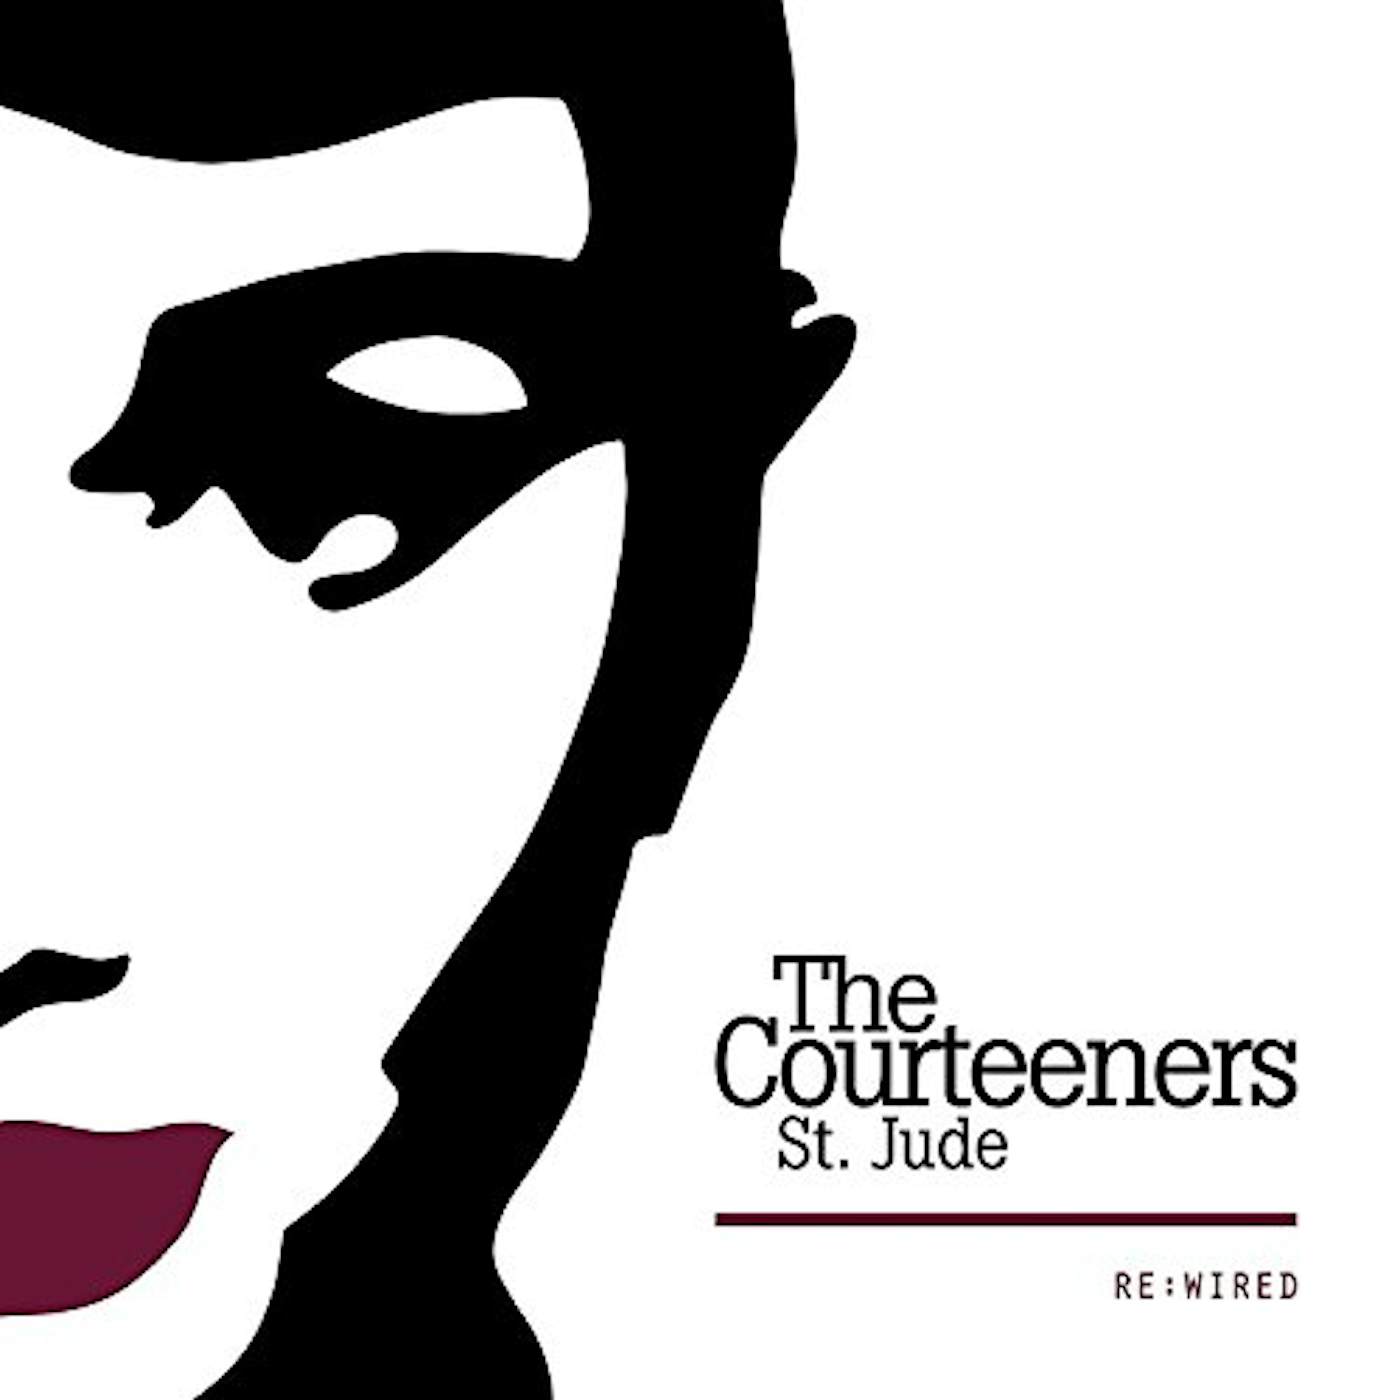 Courteeners ST JUDE RE:WIRED Vinyl Record